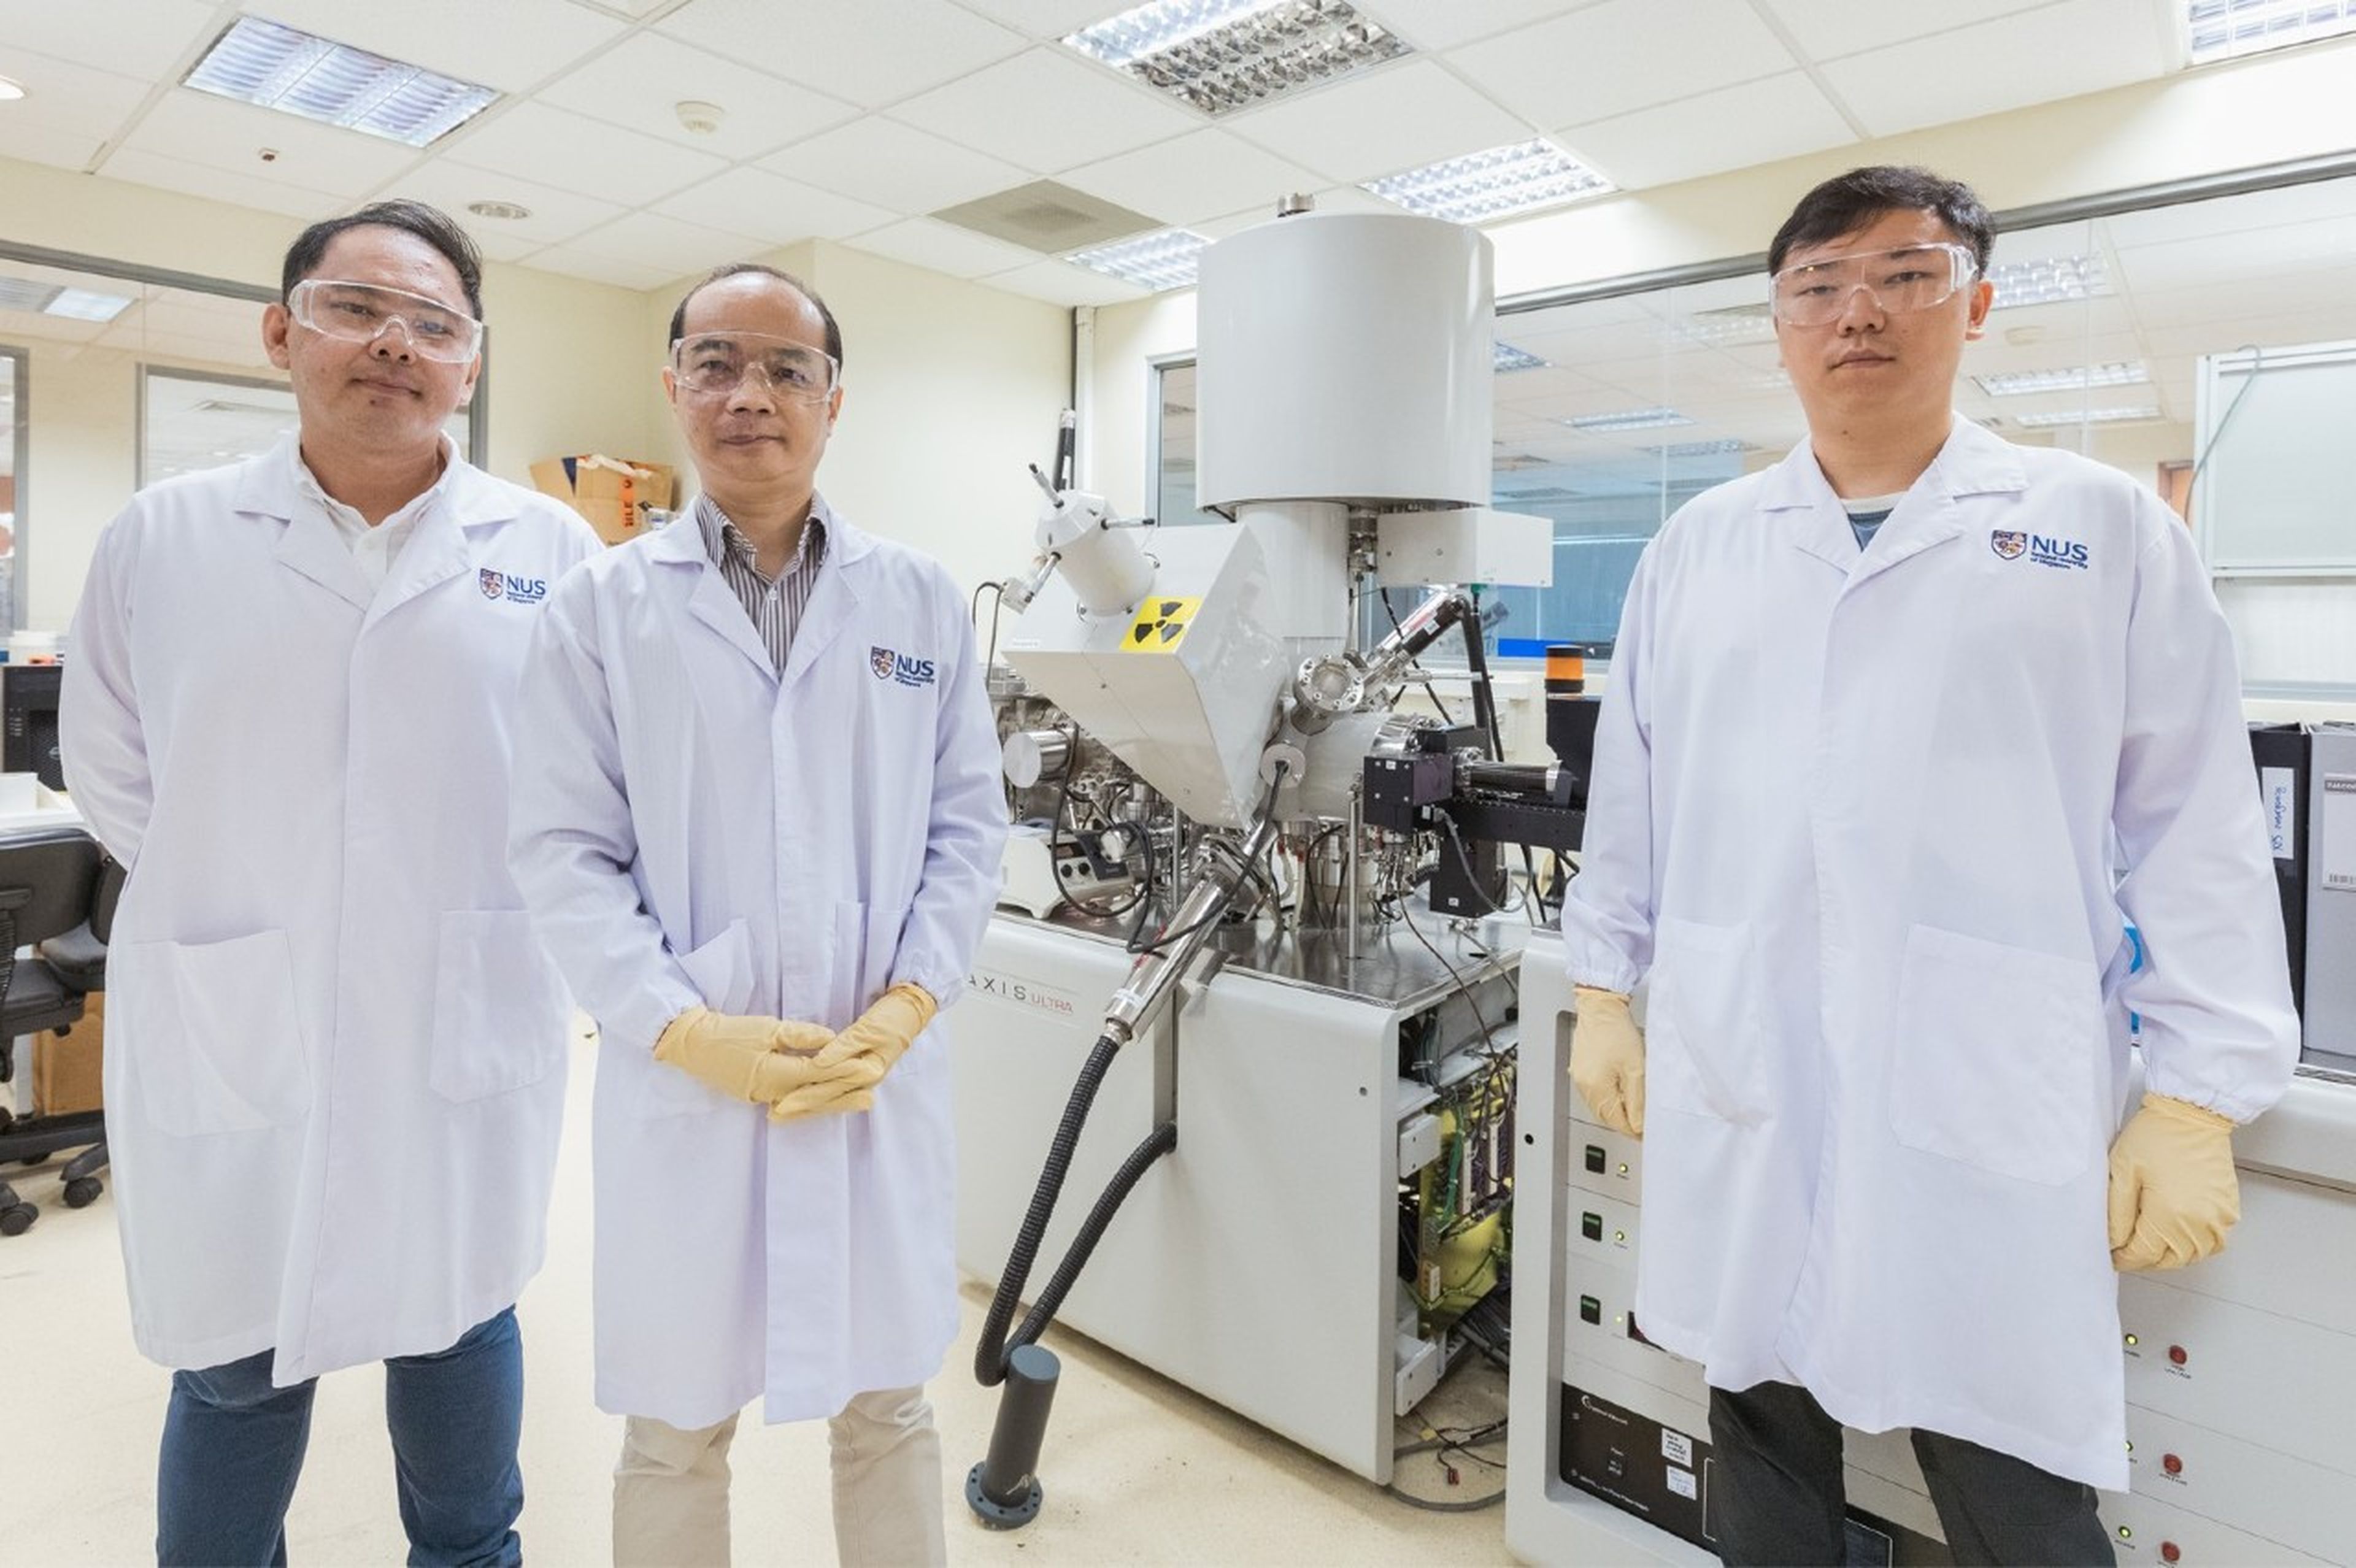 NUS researchers devise revolutionary technique to generate hydrogen more efficiently from water